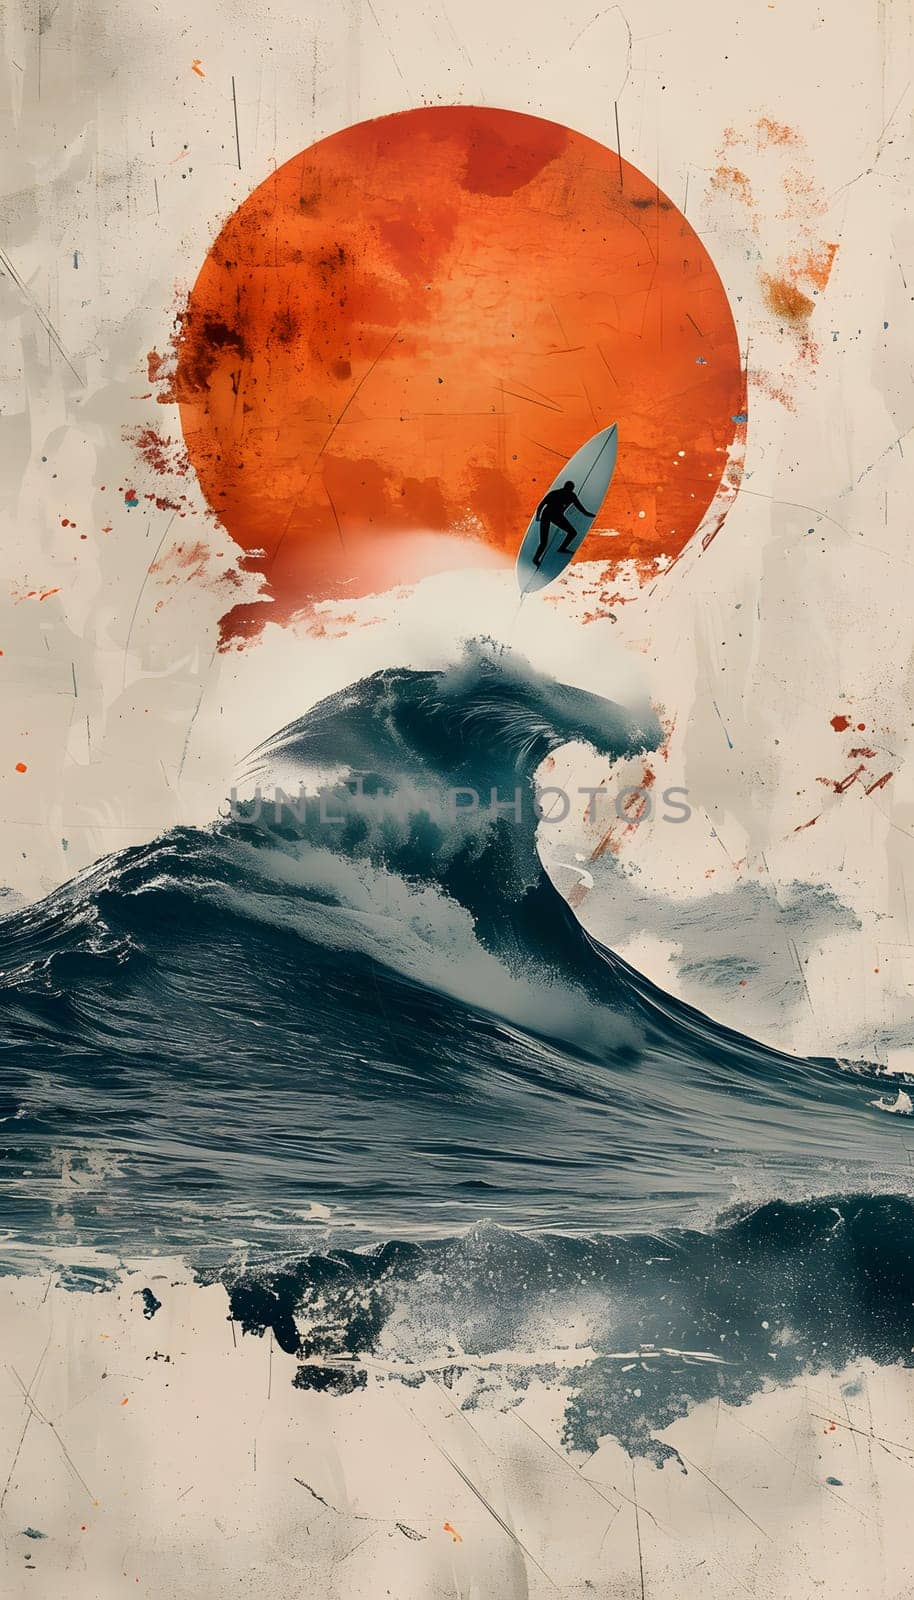 Art painting of a figure surfing a wind wave under a red sun in watercolor by Nadtochiy